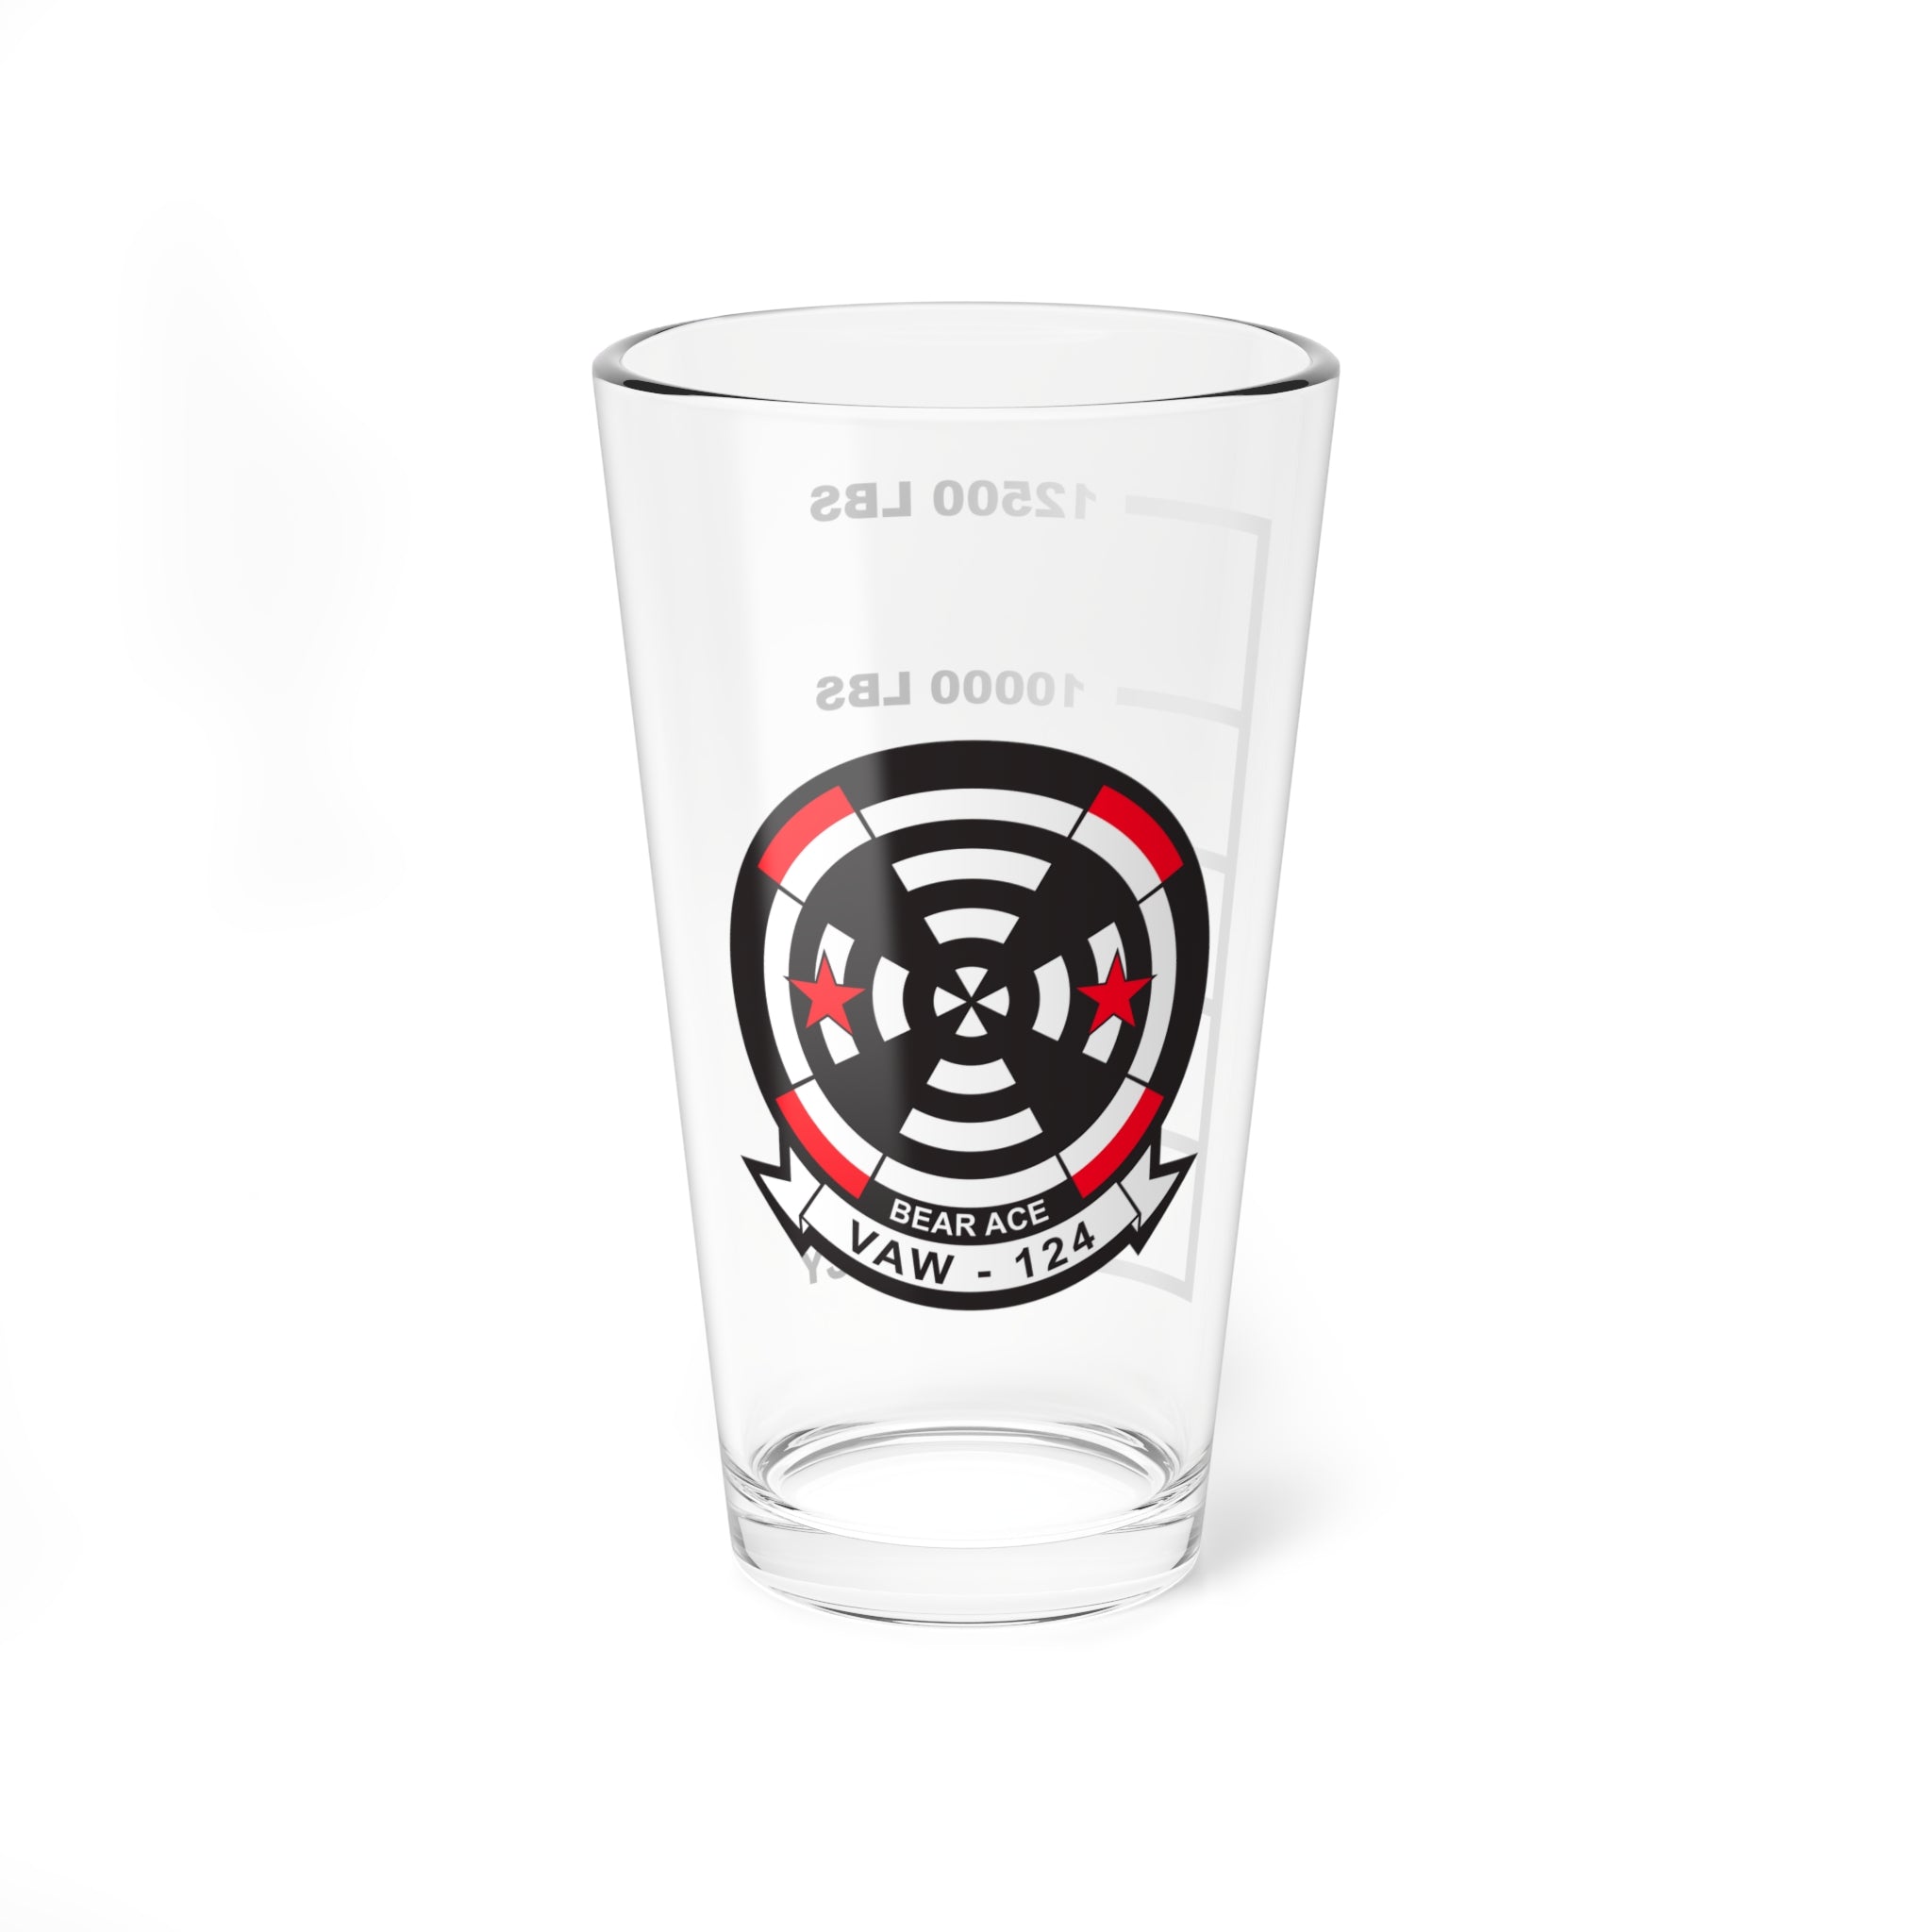 VAW-124 "Bear Aces"  Fuel Low Pint Glass, 16oz, Navy Airborne Command and Control Squadron Flying the E-2 Hawkeye